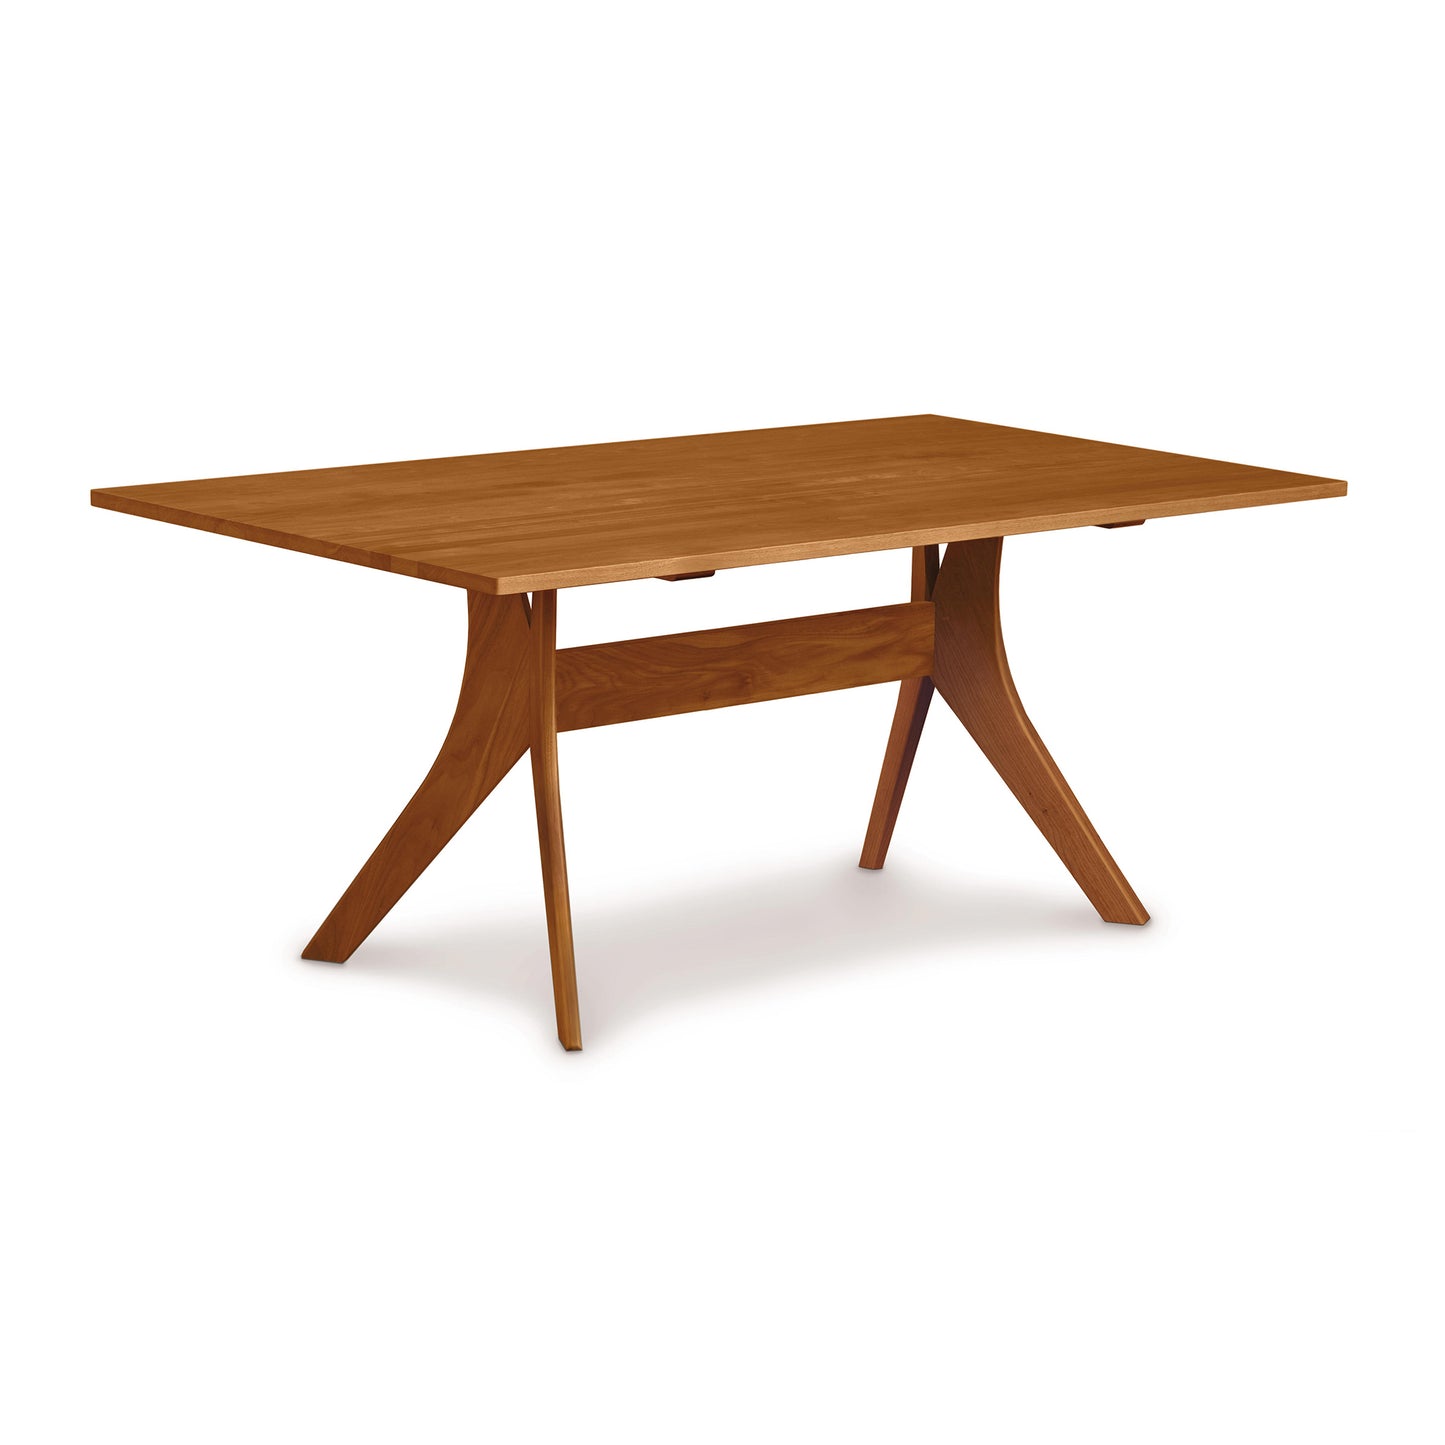 An Audrey Solid Top Dining Table by Copeland Furniture with a wooden top.